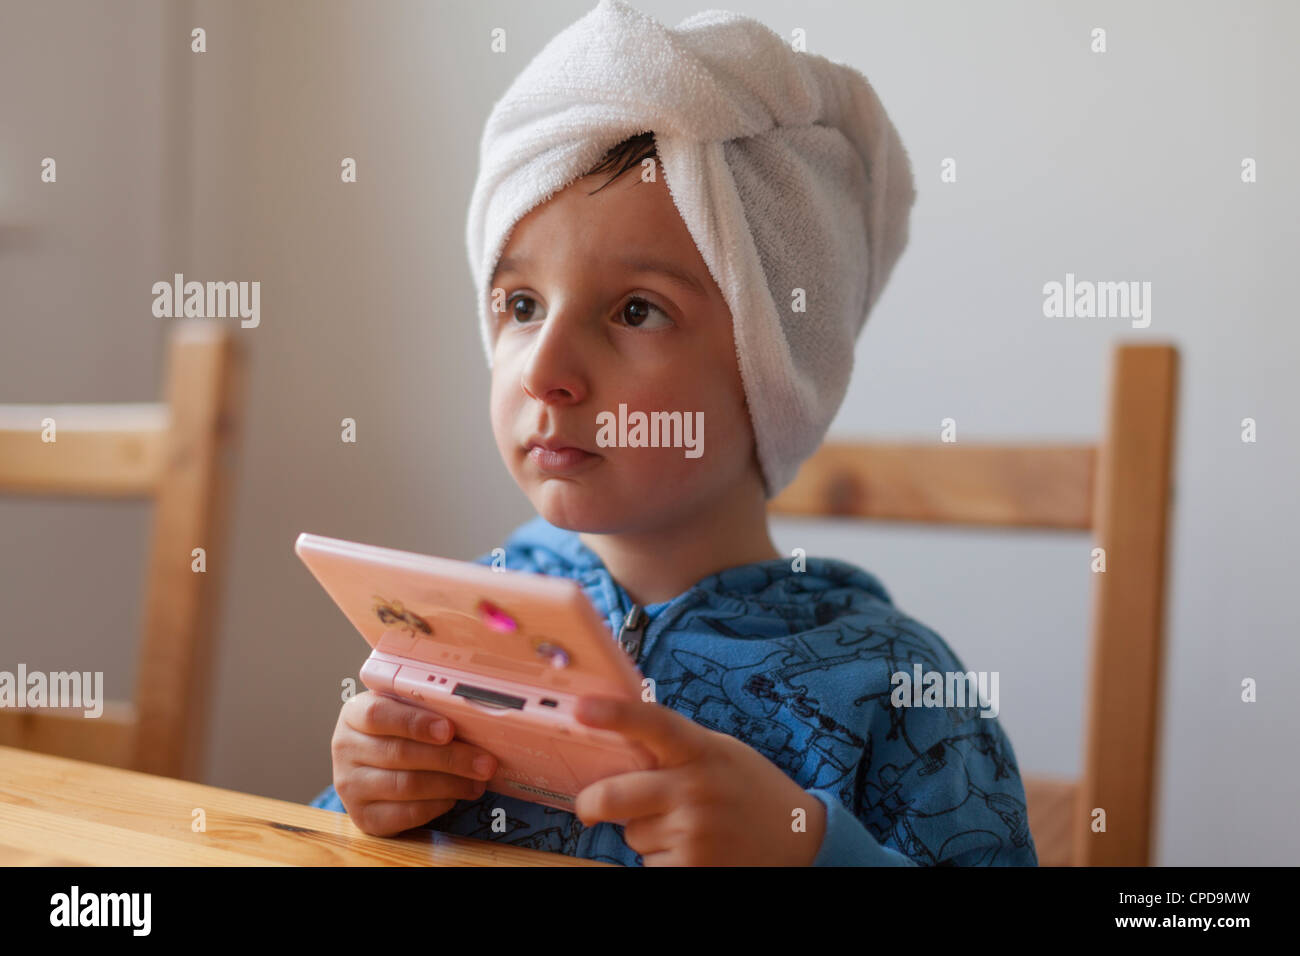 Young boy plays on Nintendo DS game console Stock Photo